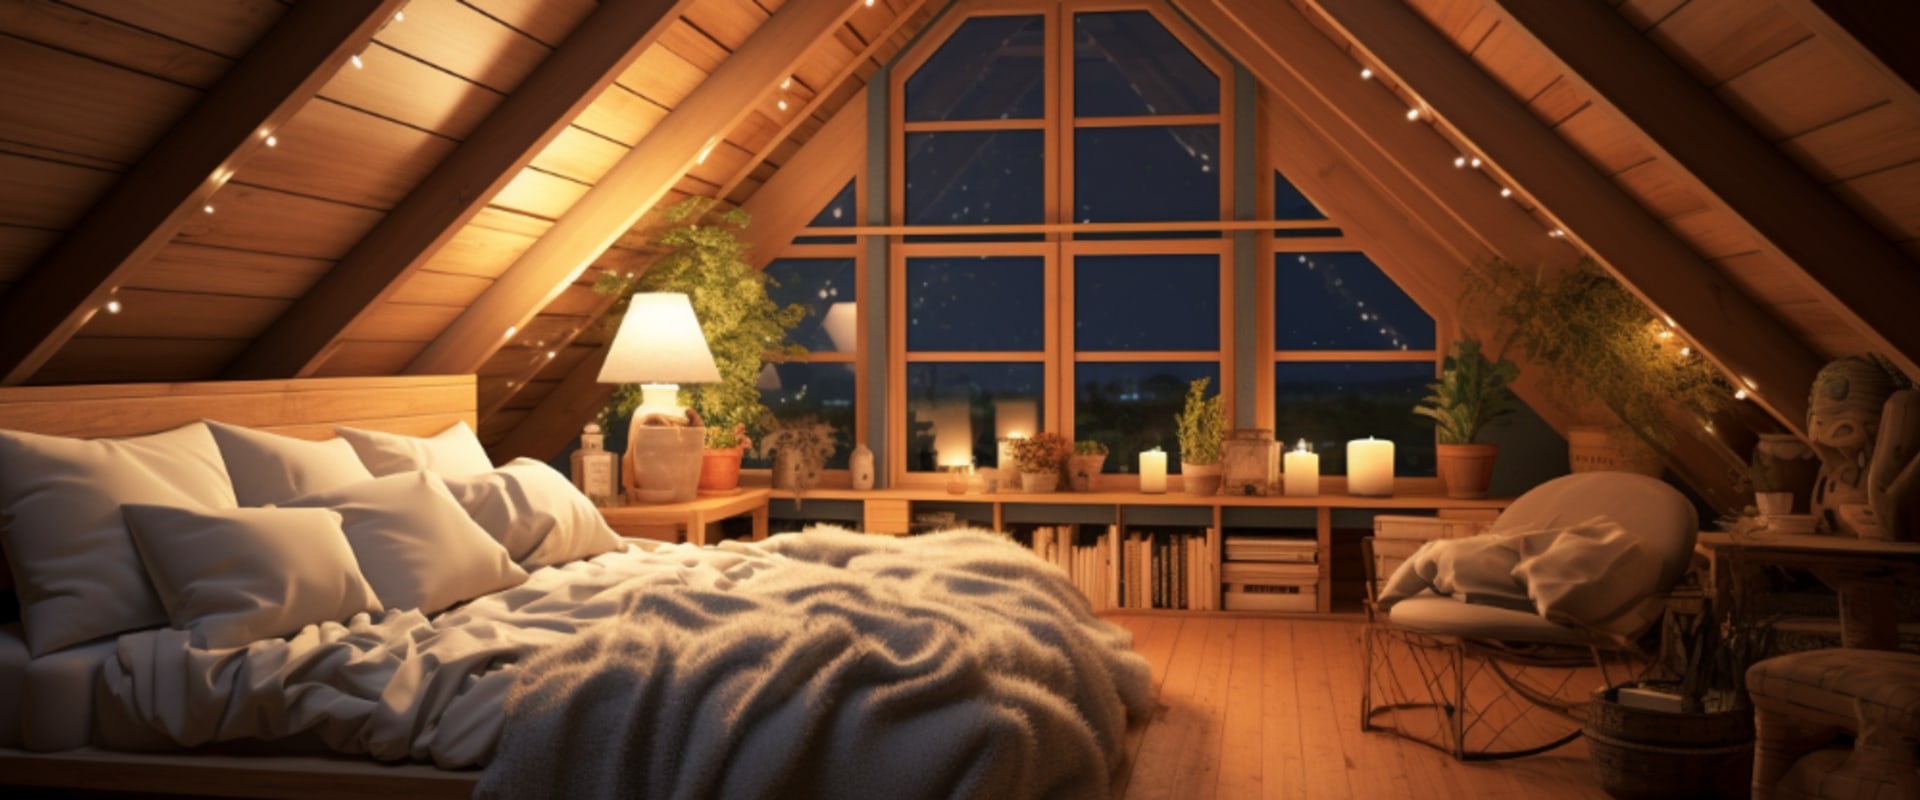 Maximizing Home Efficiency With Attic Insulation Installation Contractors in Hollywood FL